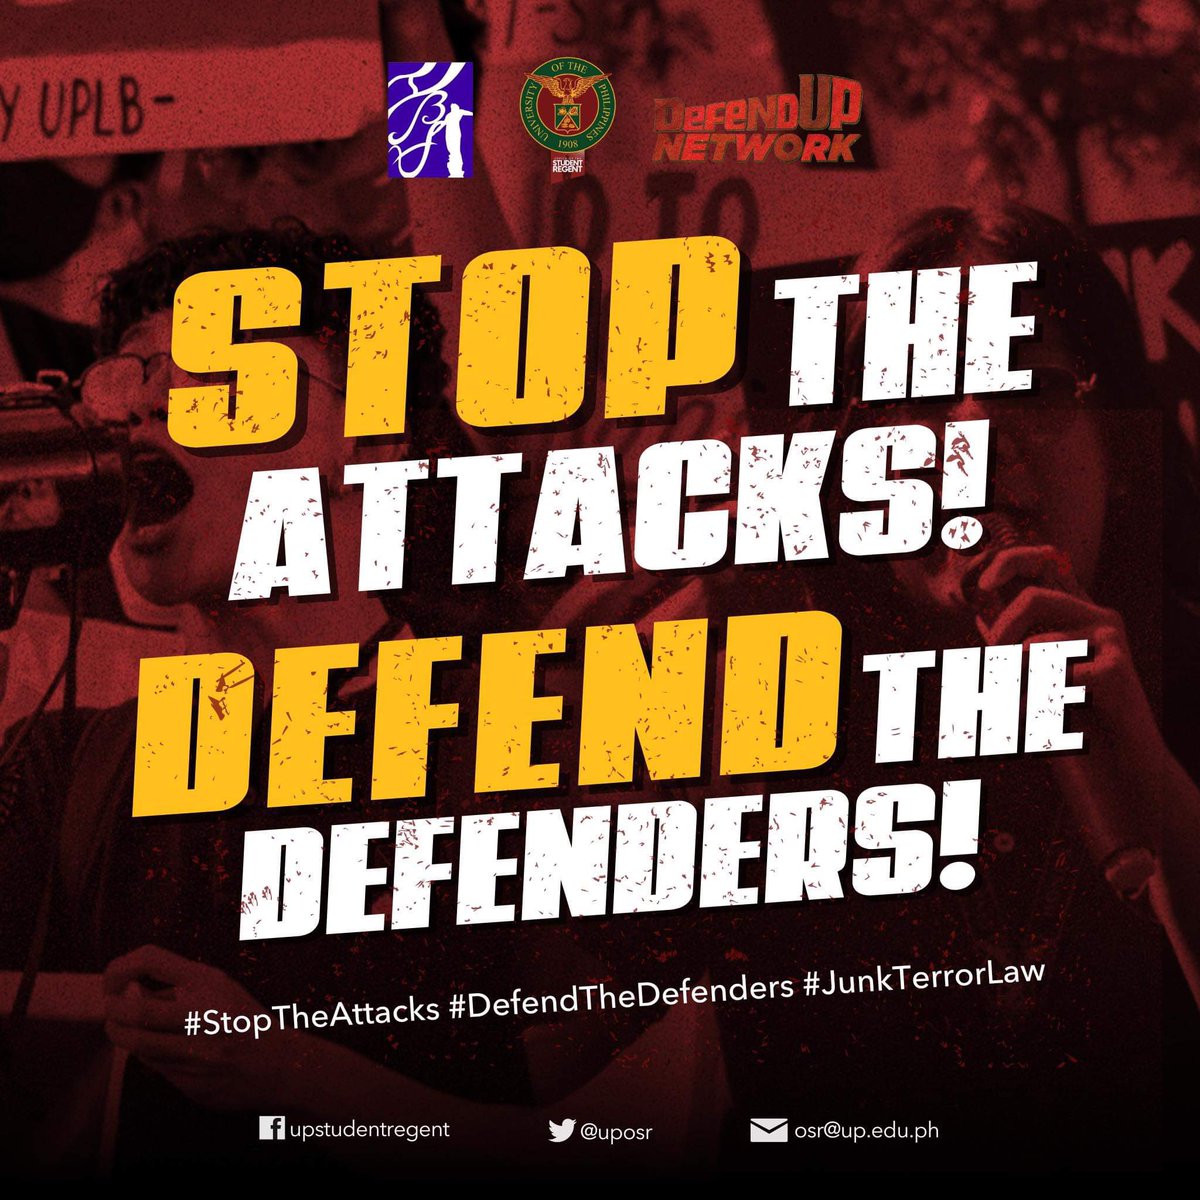 STOP THE ATTACKS! DEFEND THE DEFENDERS!

Joint statement of the Office of the Student Regent, KASAMA sa UP, and Defend UP Network on the attacks on 2nd SR Nominee Red Masacupan and 3rd SR Nominee JPEG Garcia

#StopTheAttacks
#DefendTheDefenders
#JunkTerrorLaw